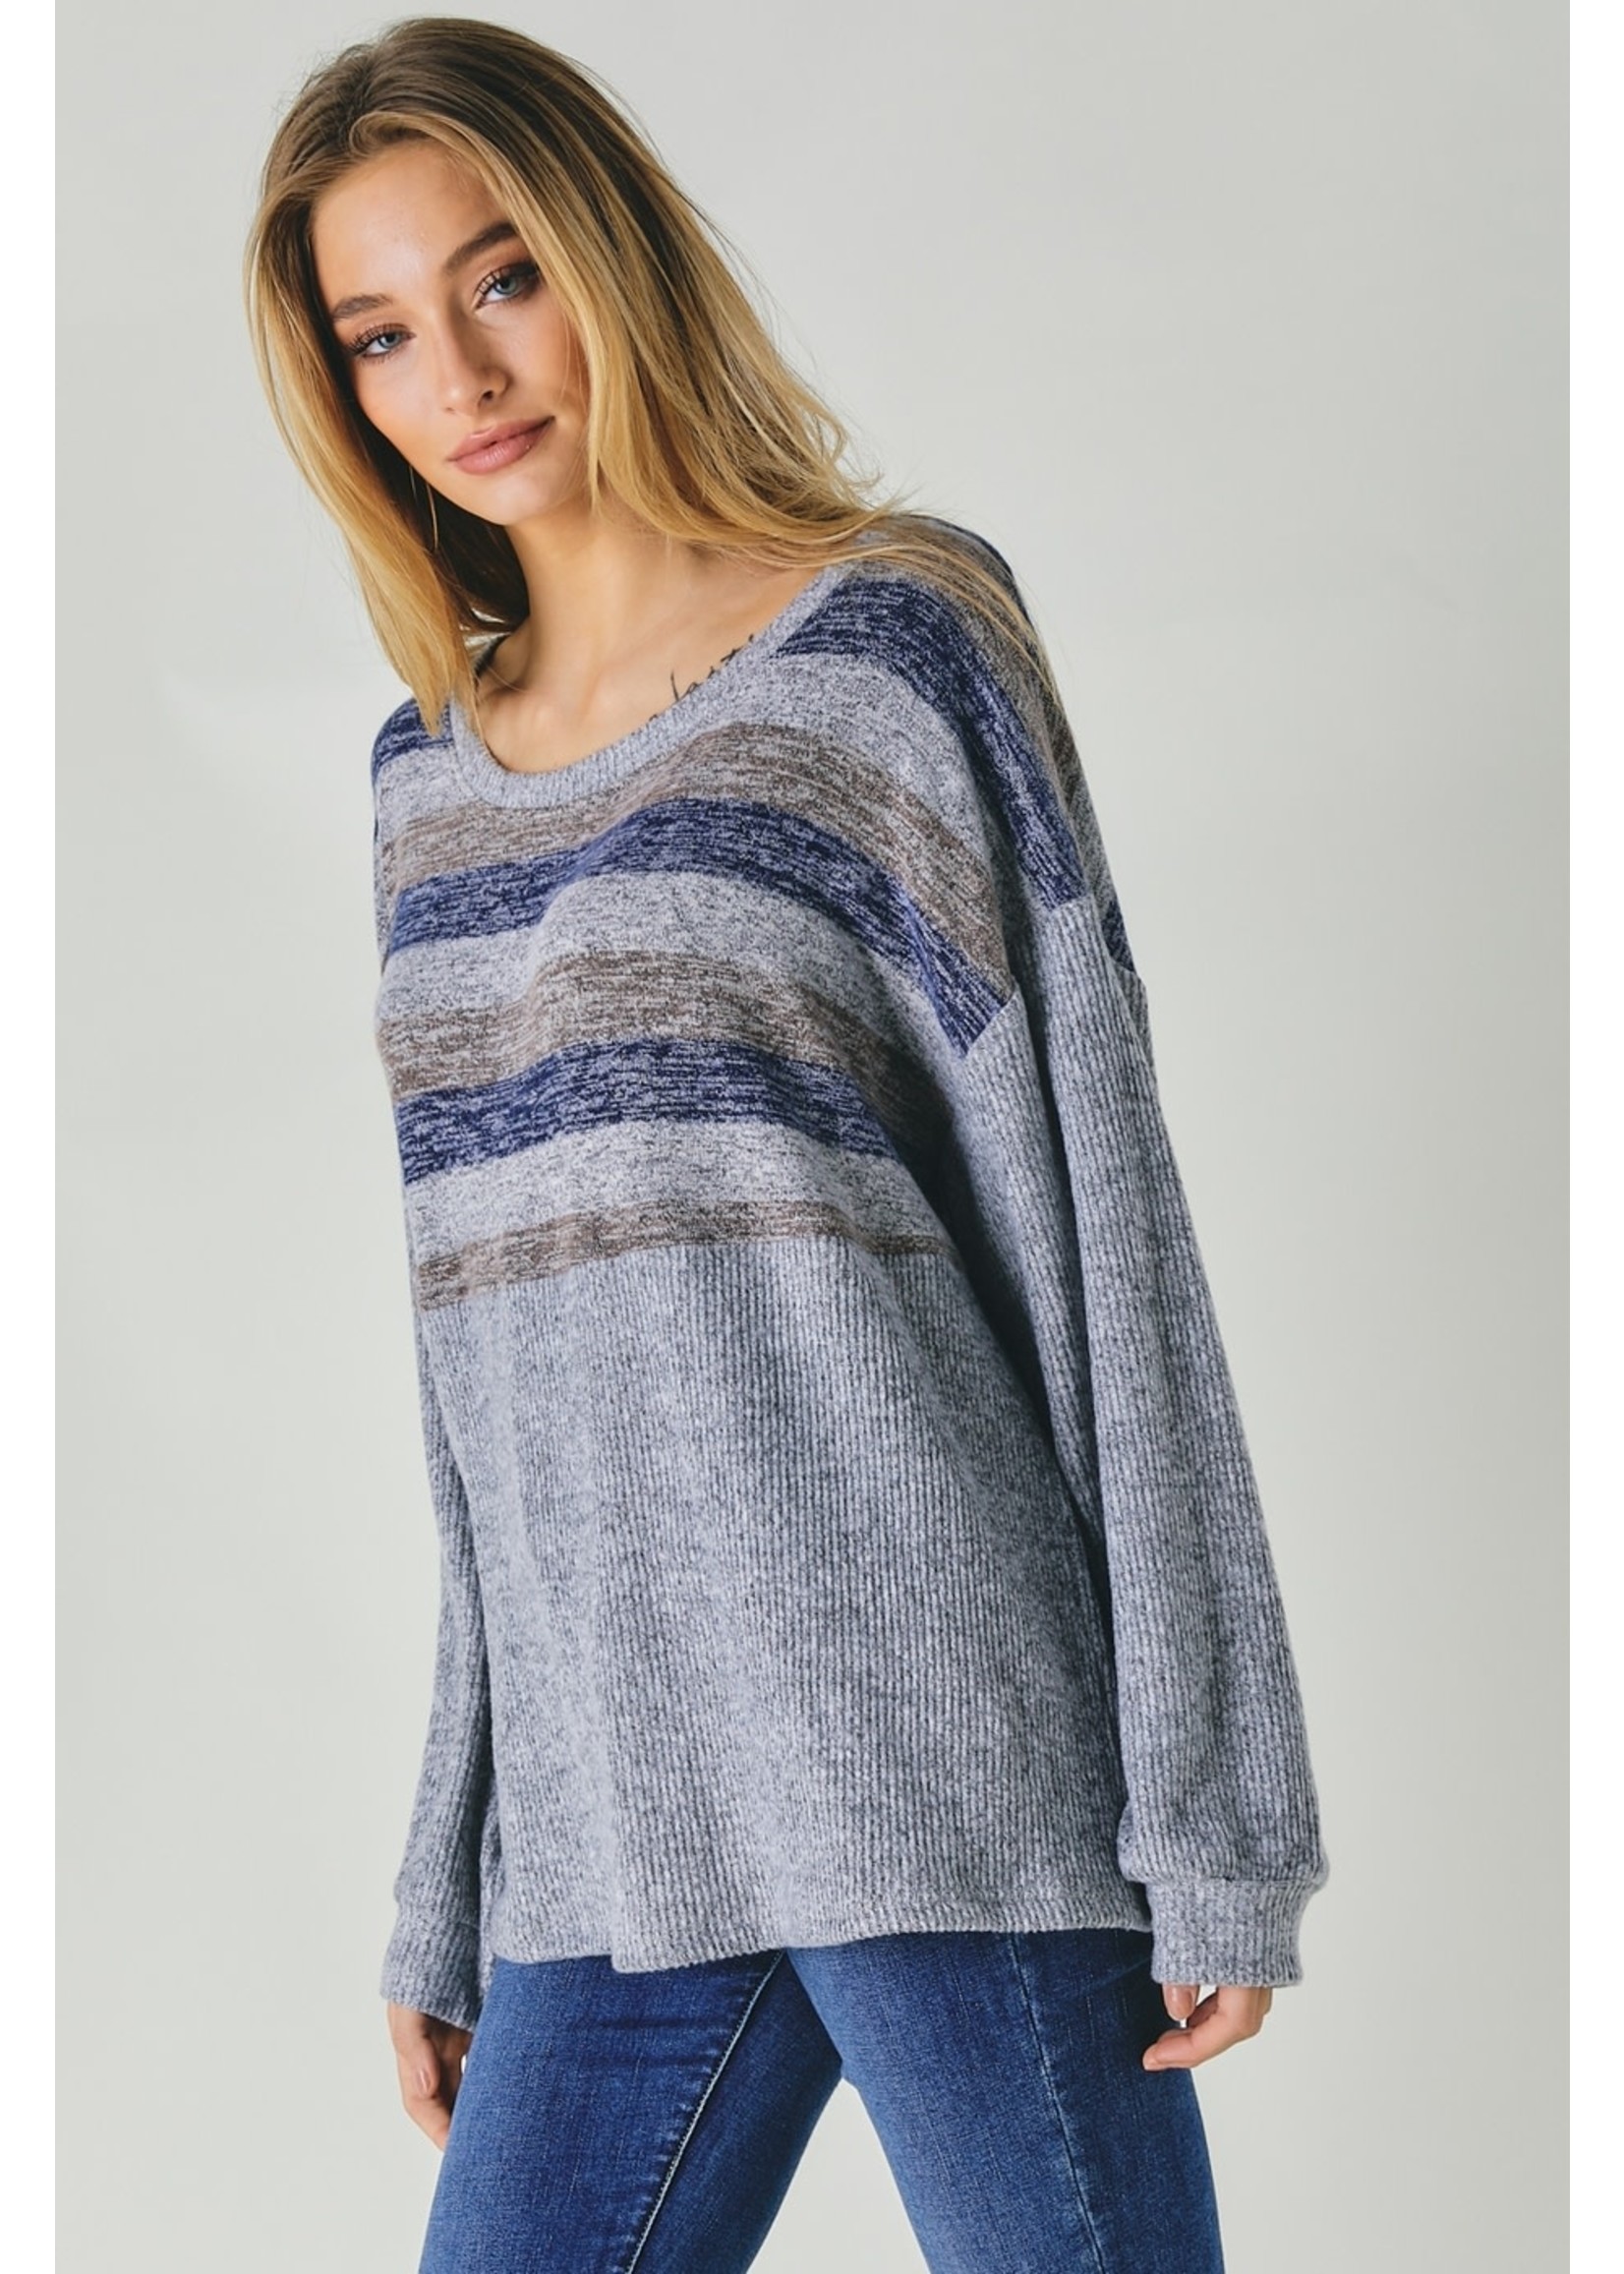 Loose Fitting Striped Top - HEATHER GREY